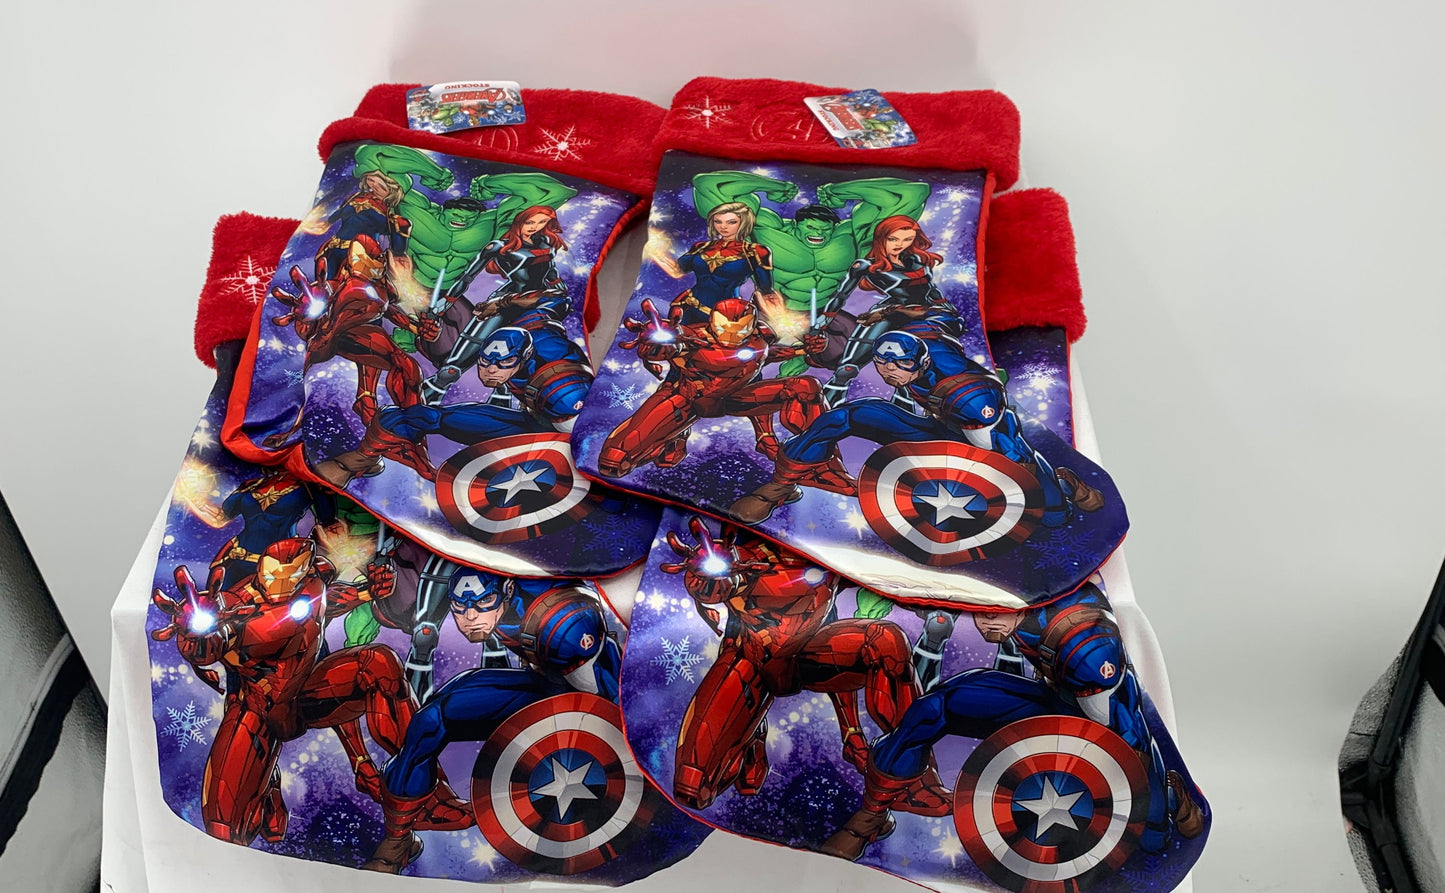 New At Home Avengers 17.5" Christmas Stockings Set Of 4